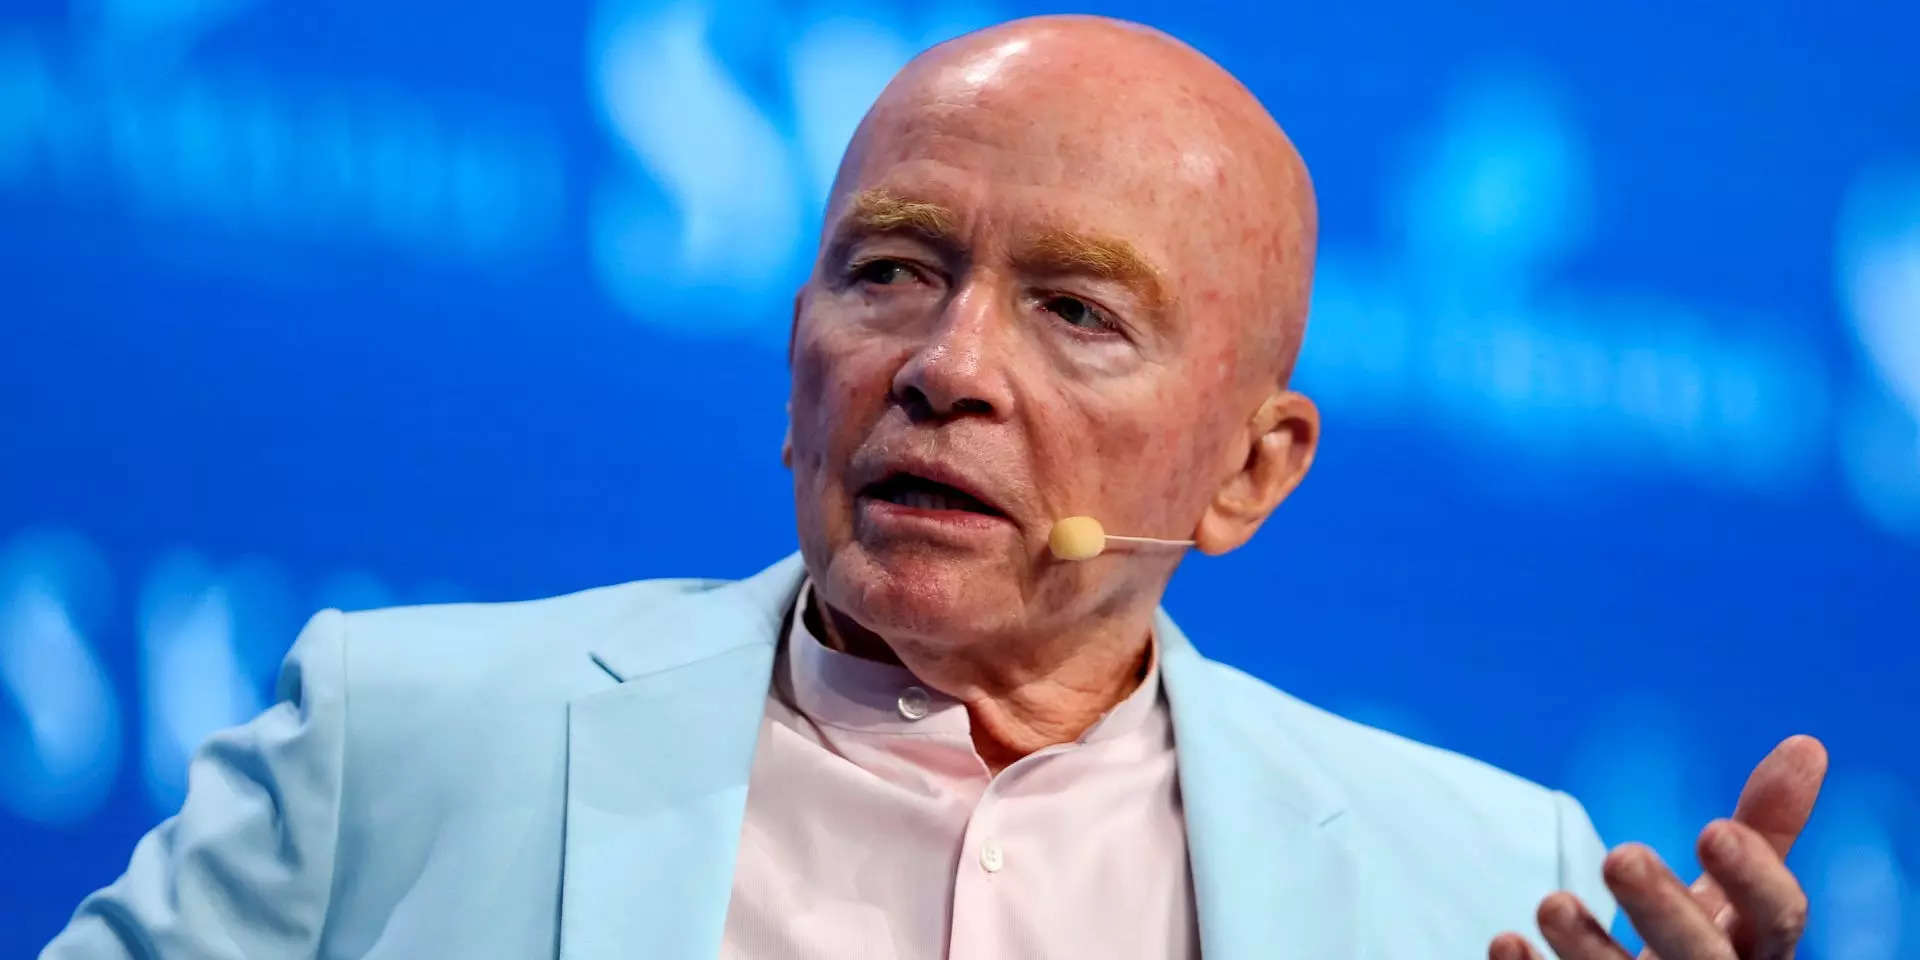 Billionaire investor Mark Mobius says stocks could stay up amid Fed rate hike and possible recession